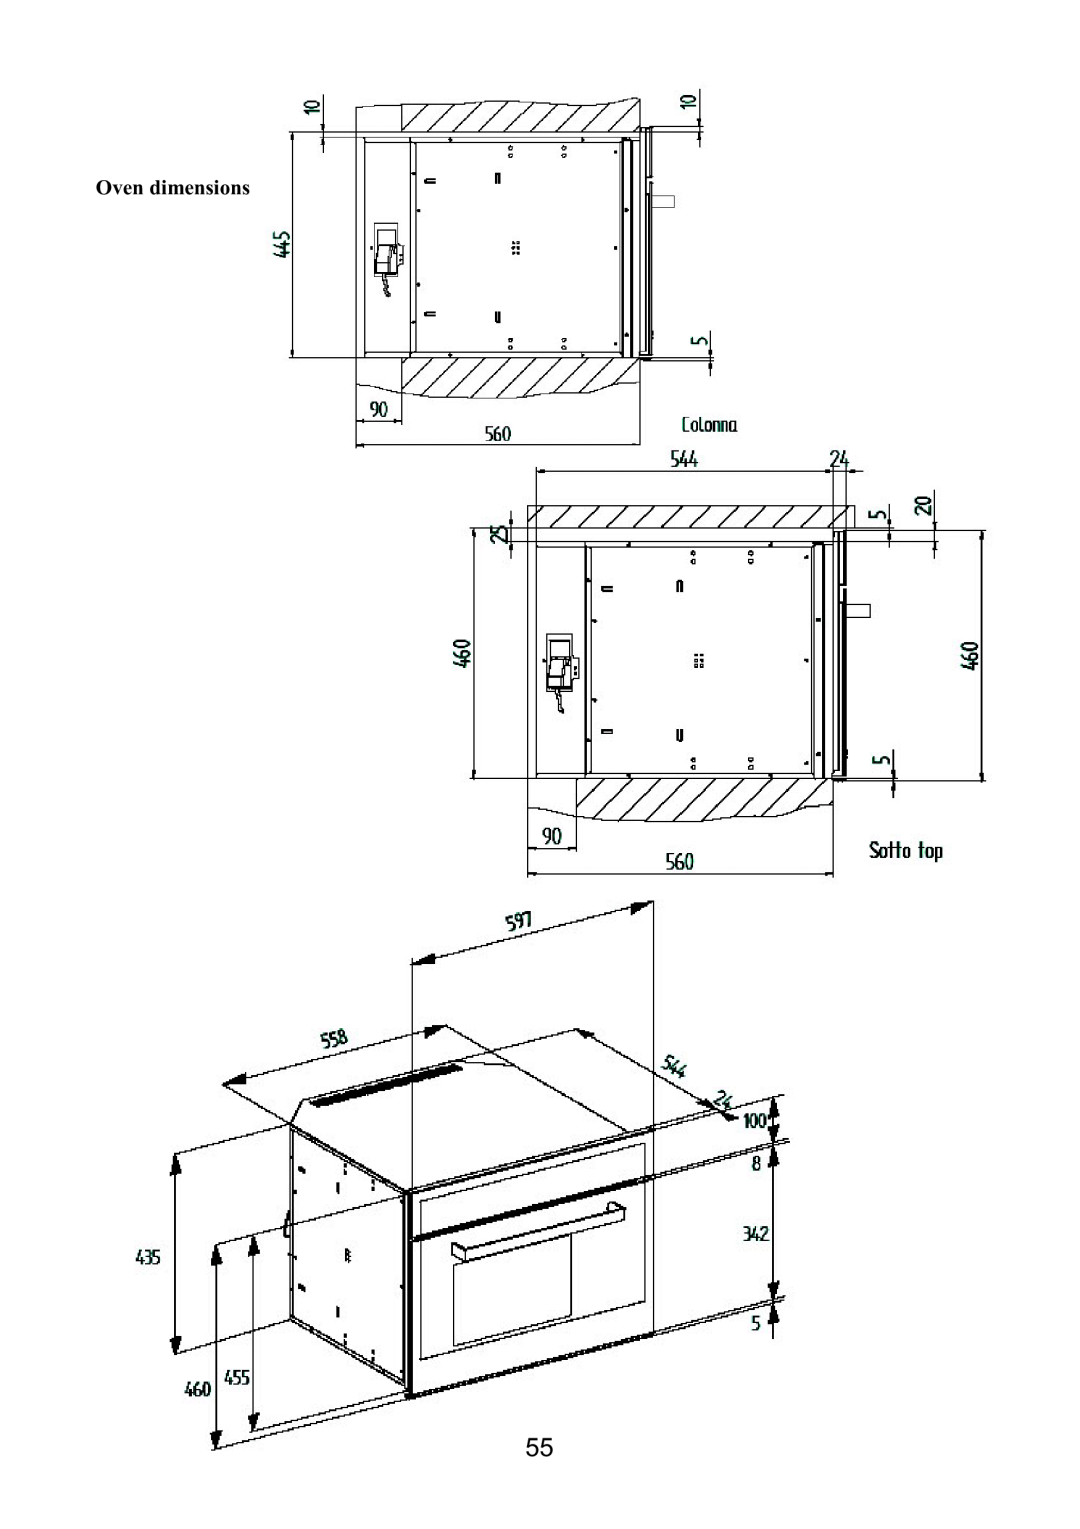 Foster S4000 user manual Oven dimensions 